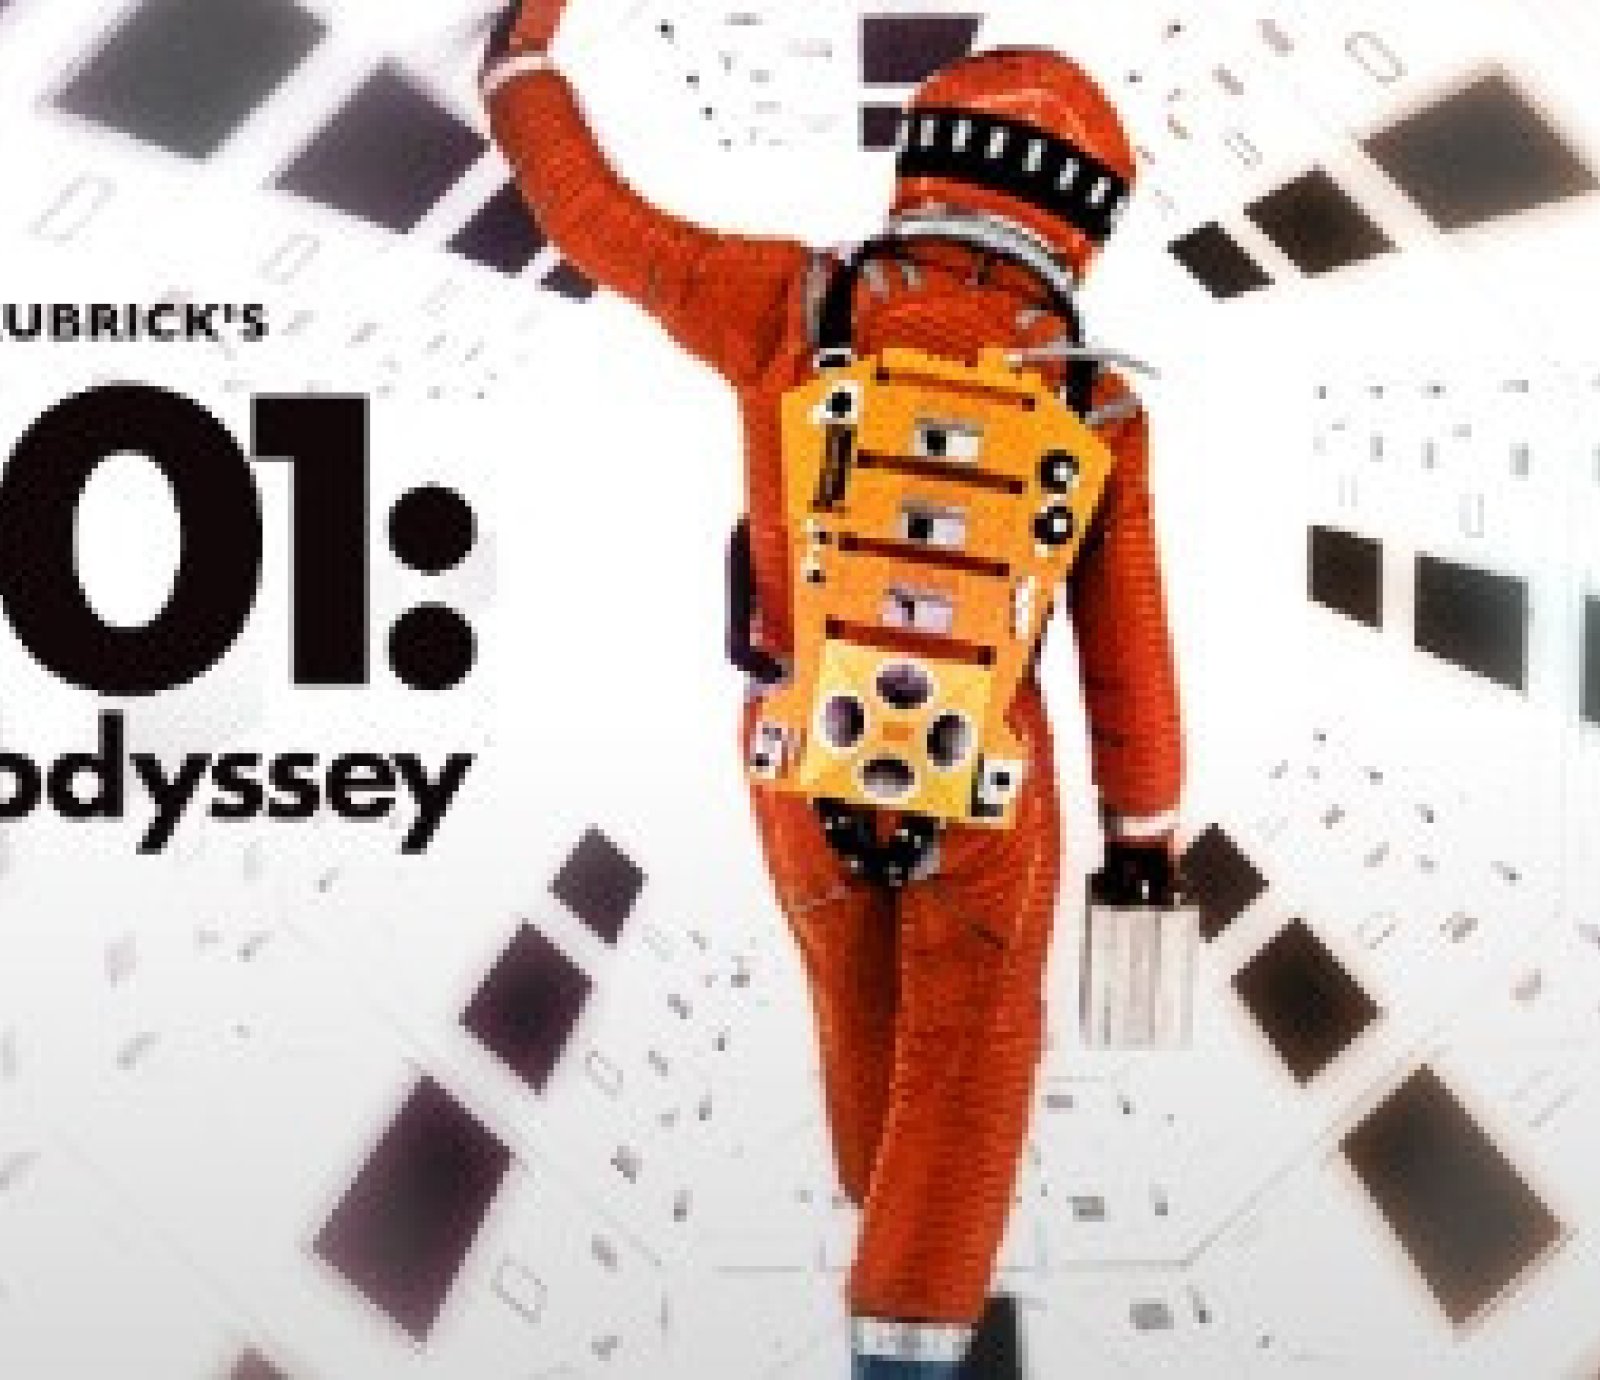 2001: A Space Odyssey in 70mm